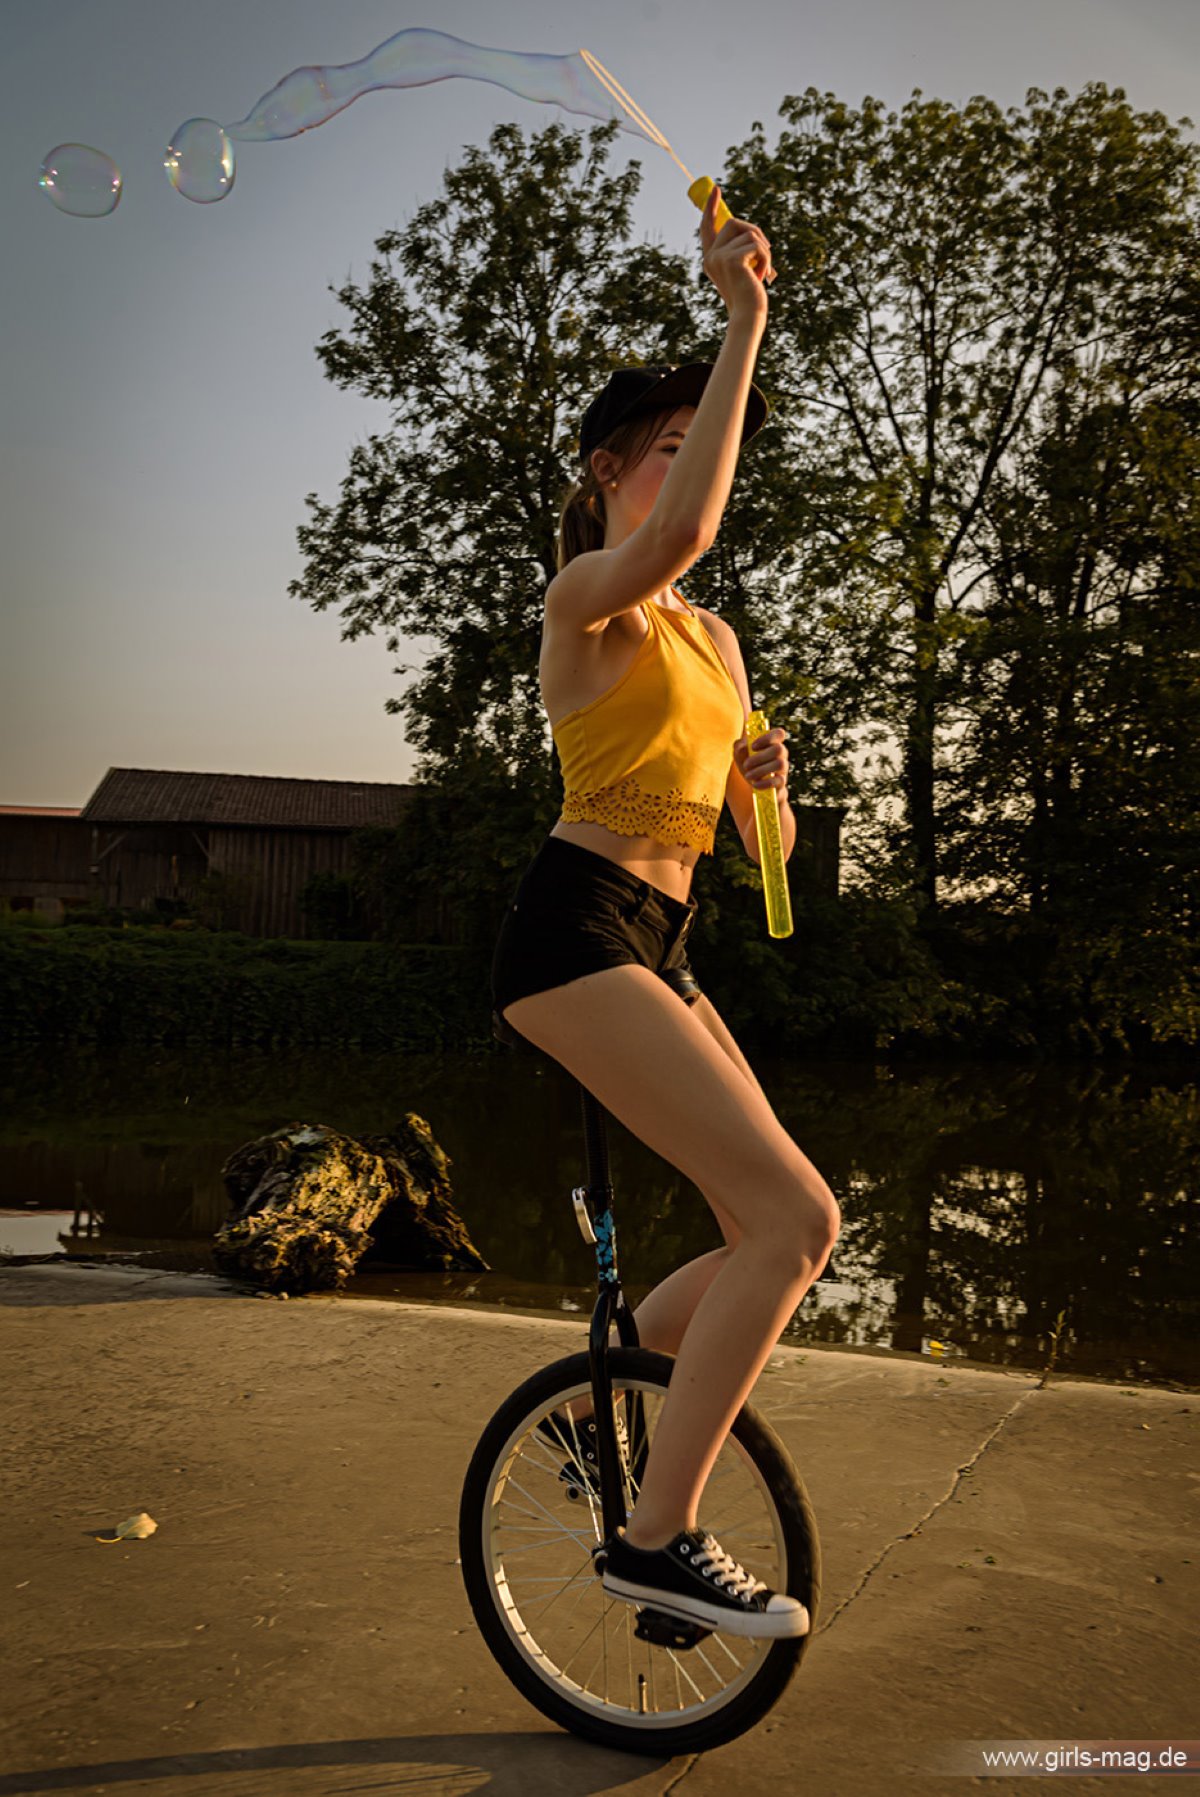 Girls Mag Annika Bubbles on a Unicycle 0115 7667068025.jpg